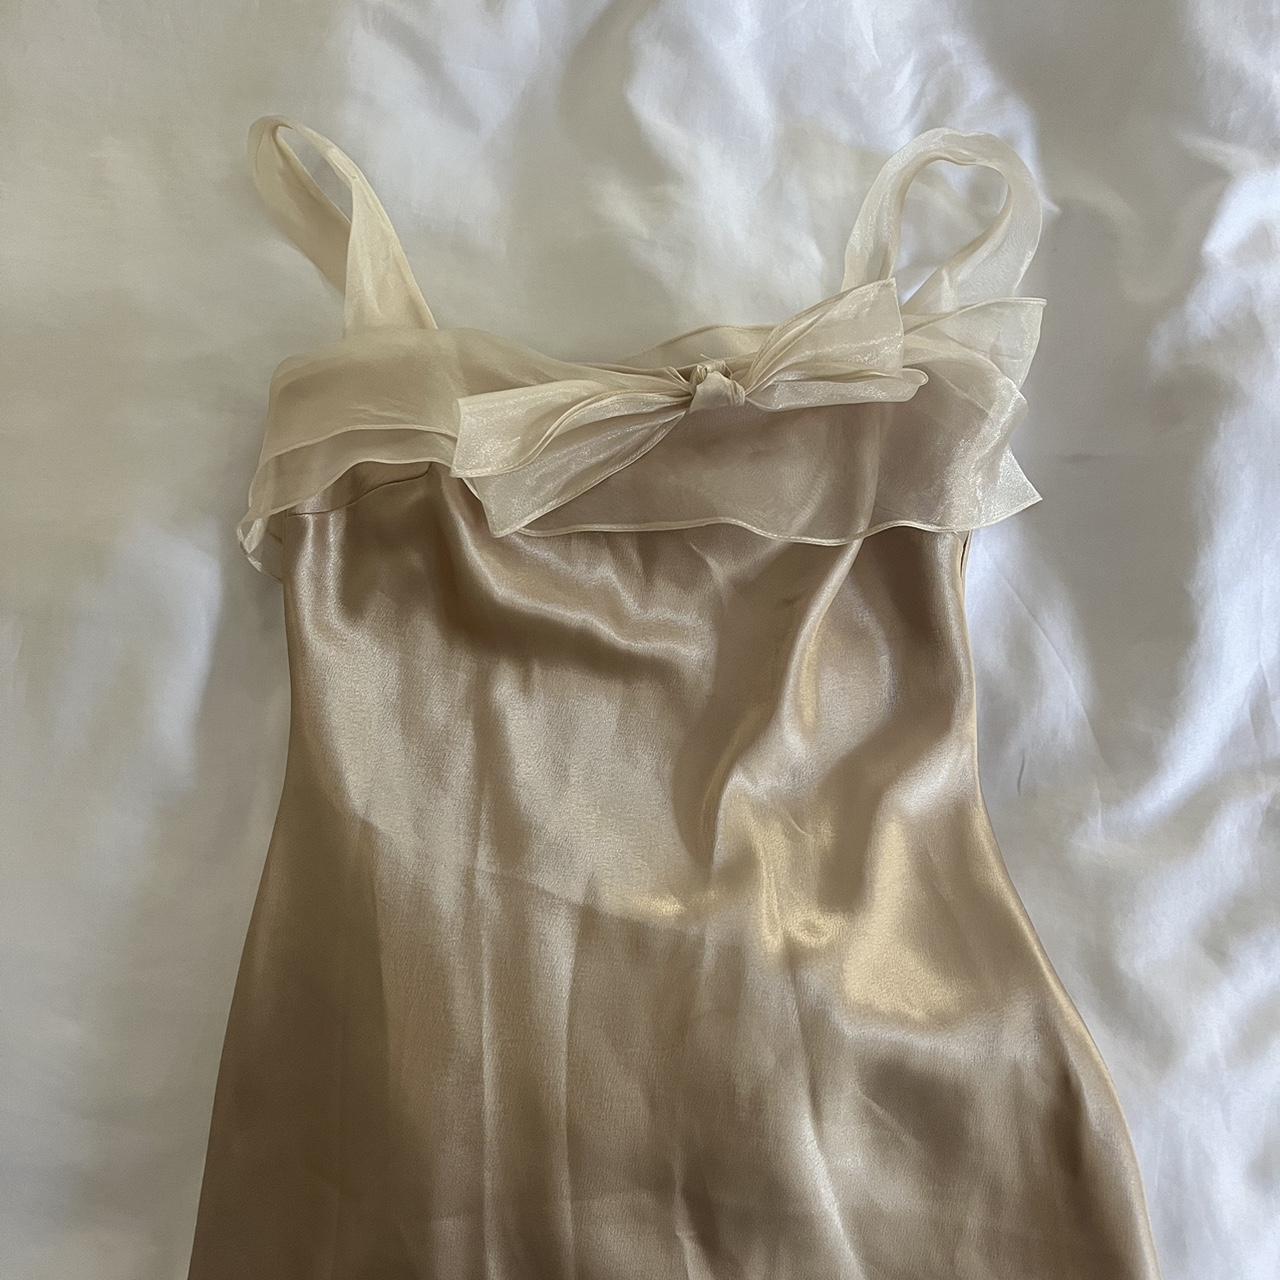 daniel yam pearl gown vintage perfect condition - Depop